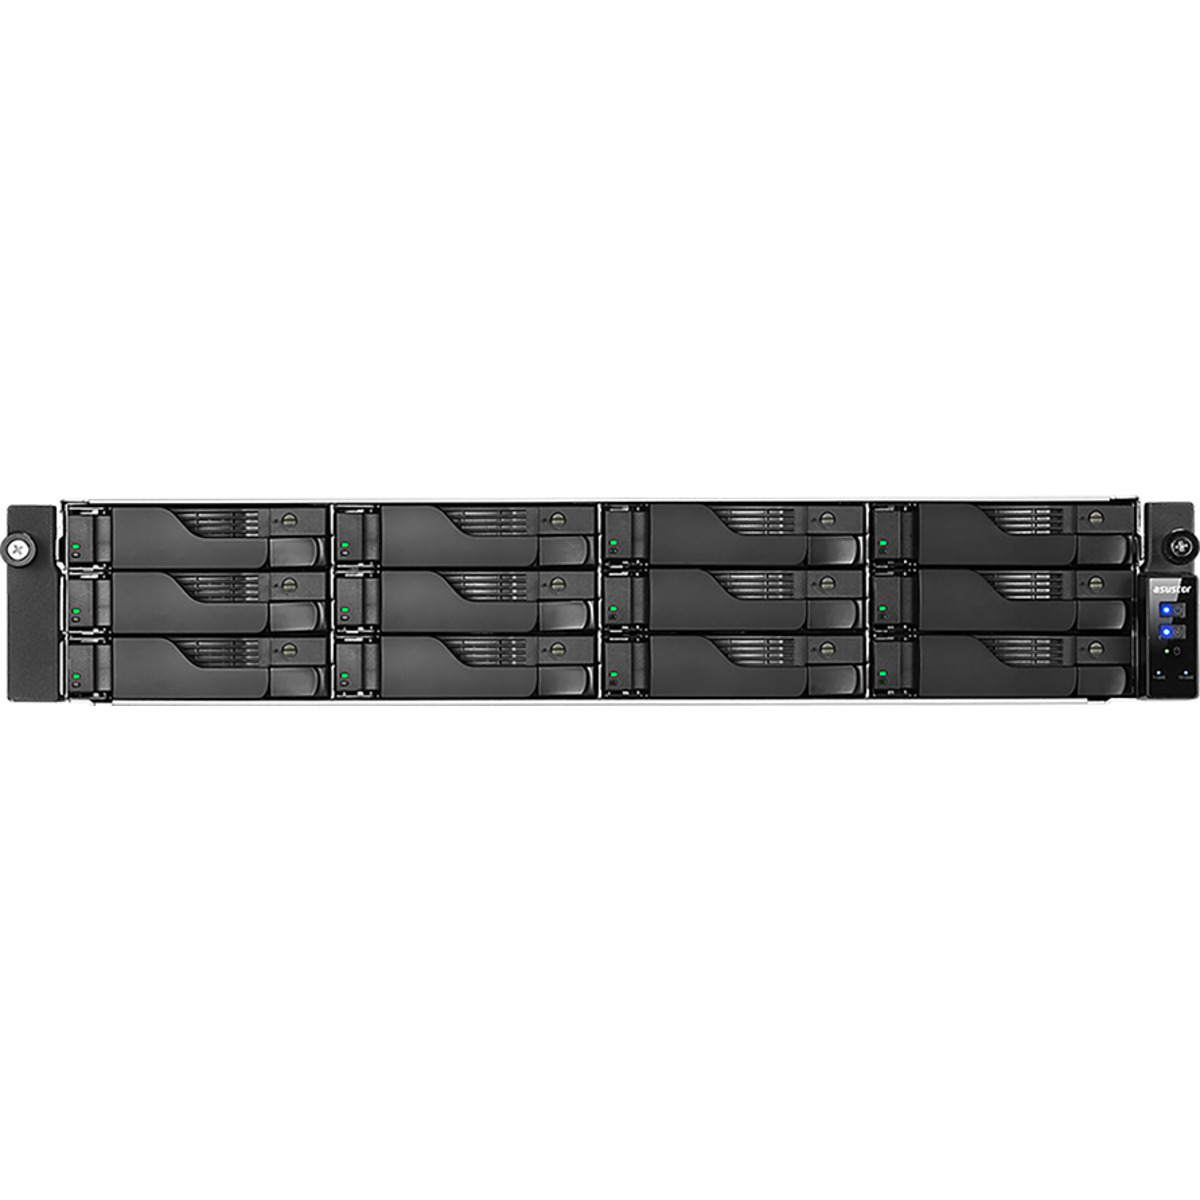 ASUSTOR LOCKERSTOR 12RD AS6512RD 180tb 12-Bay RackMount Multimedia / Power User / Business NAS - Network Attached Storage Device 10x18tb Toshiba Enterprise Capacity MG09ACA18TE 3.5 7200rpm SATA 6Gb/s HDD ENTERPRISE Class Drives Installed - Burn-In Tested - FREE RAM UPGRADE LOCKERSTOR 12RD AS6512RD